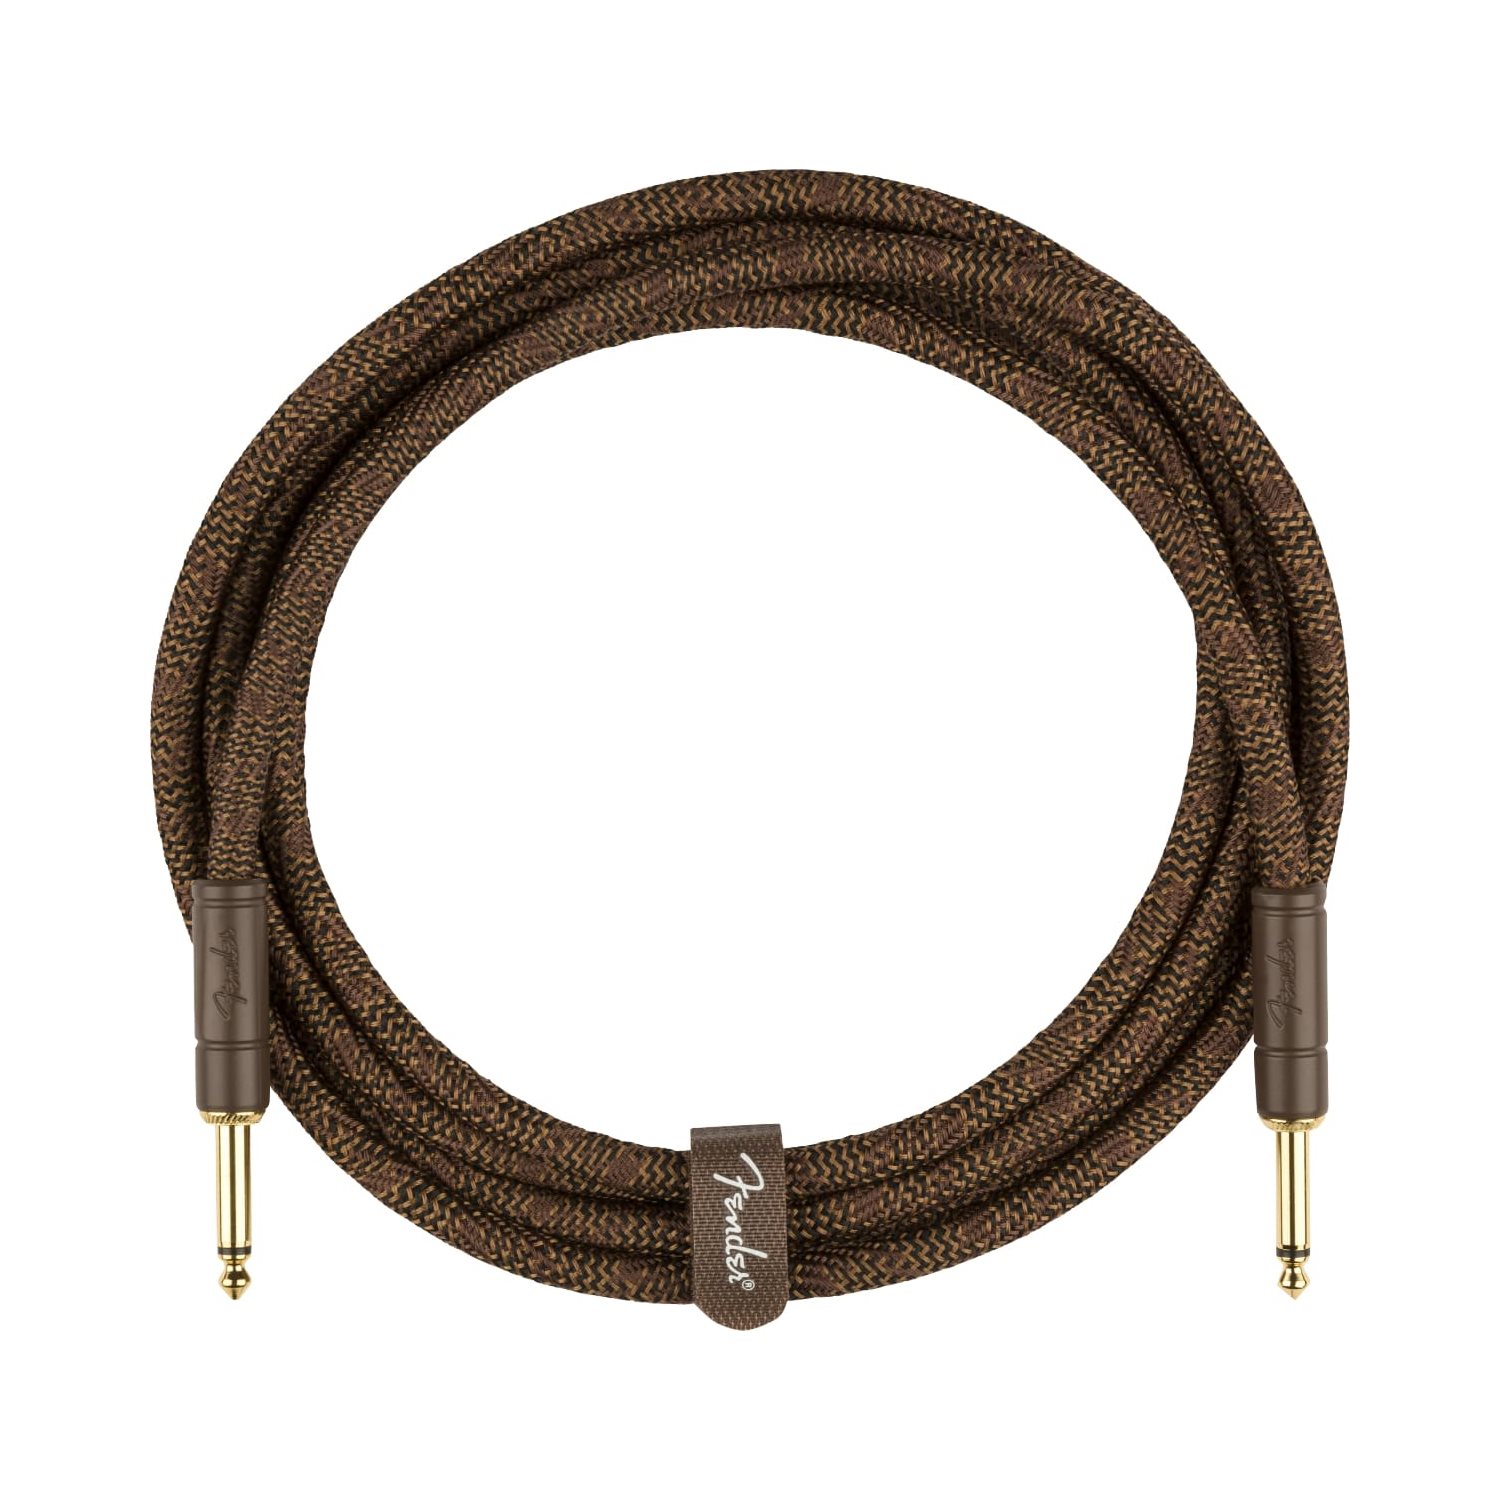 FENDER - PARAMOUNT ACOUSTIC INSTRUMENT CABLE - 10' - brown